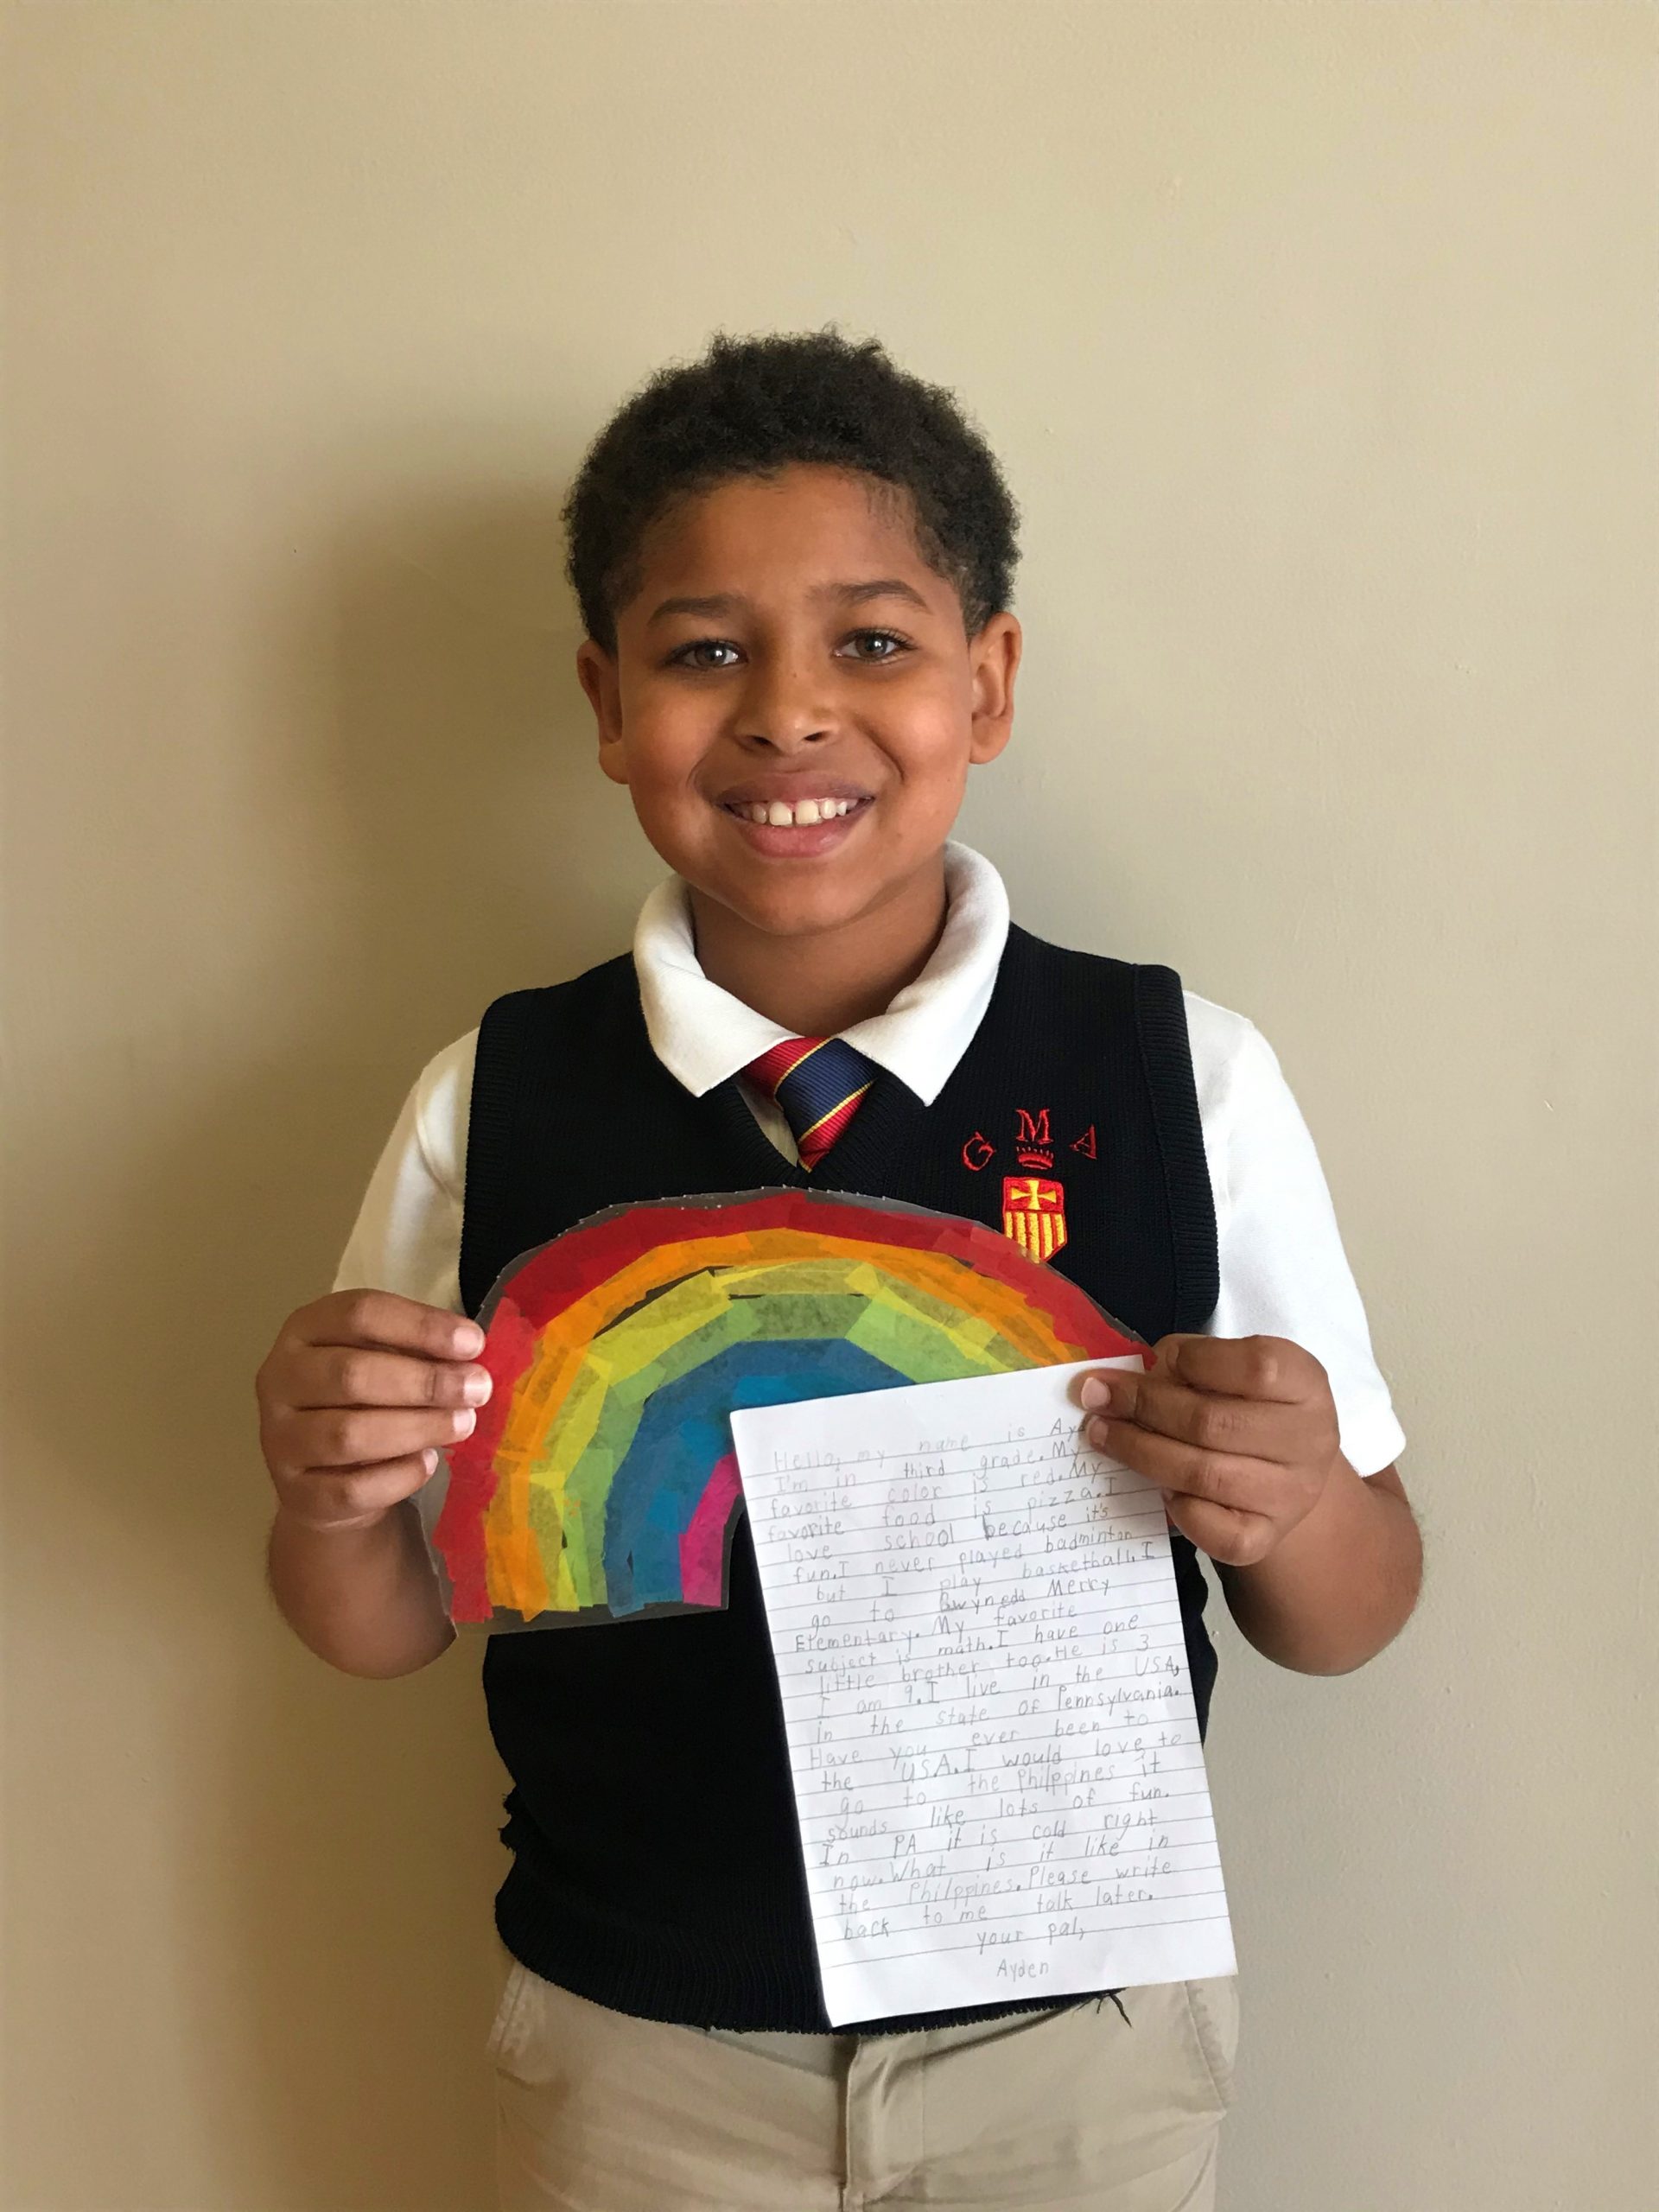 Another Gwynedd-Mercy student prepares a letter to his pen pal in the Philippines.